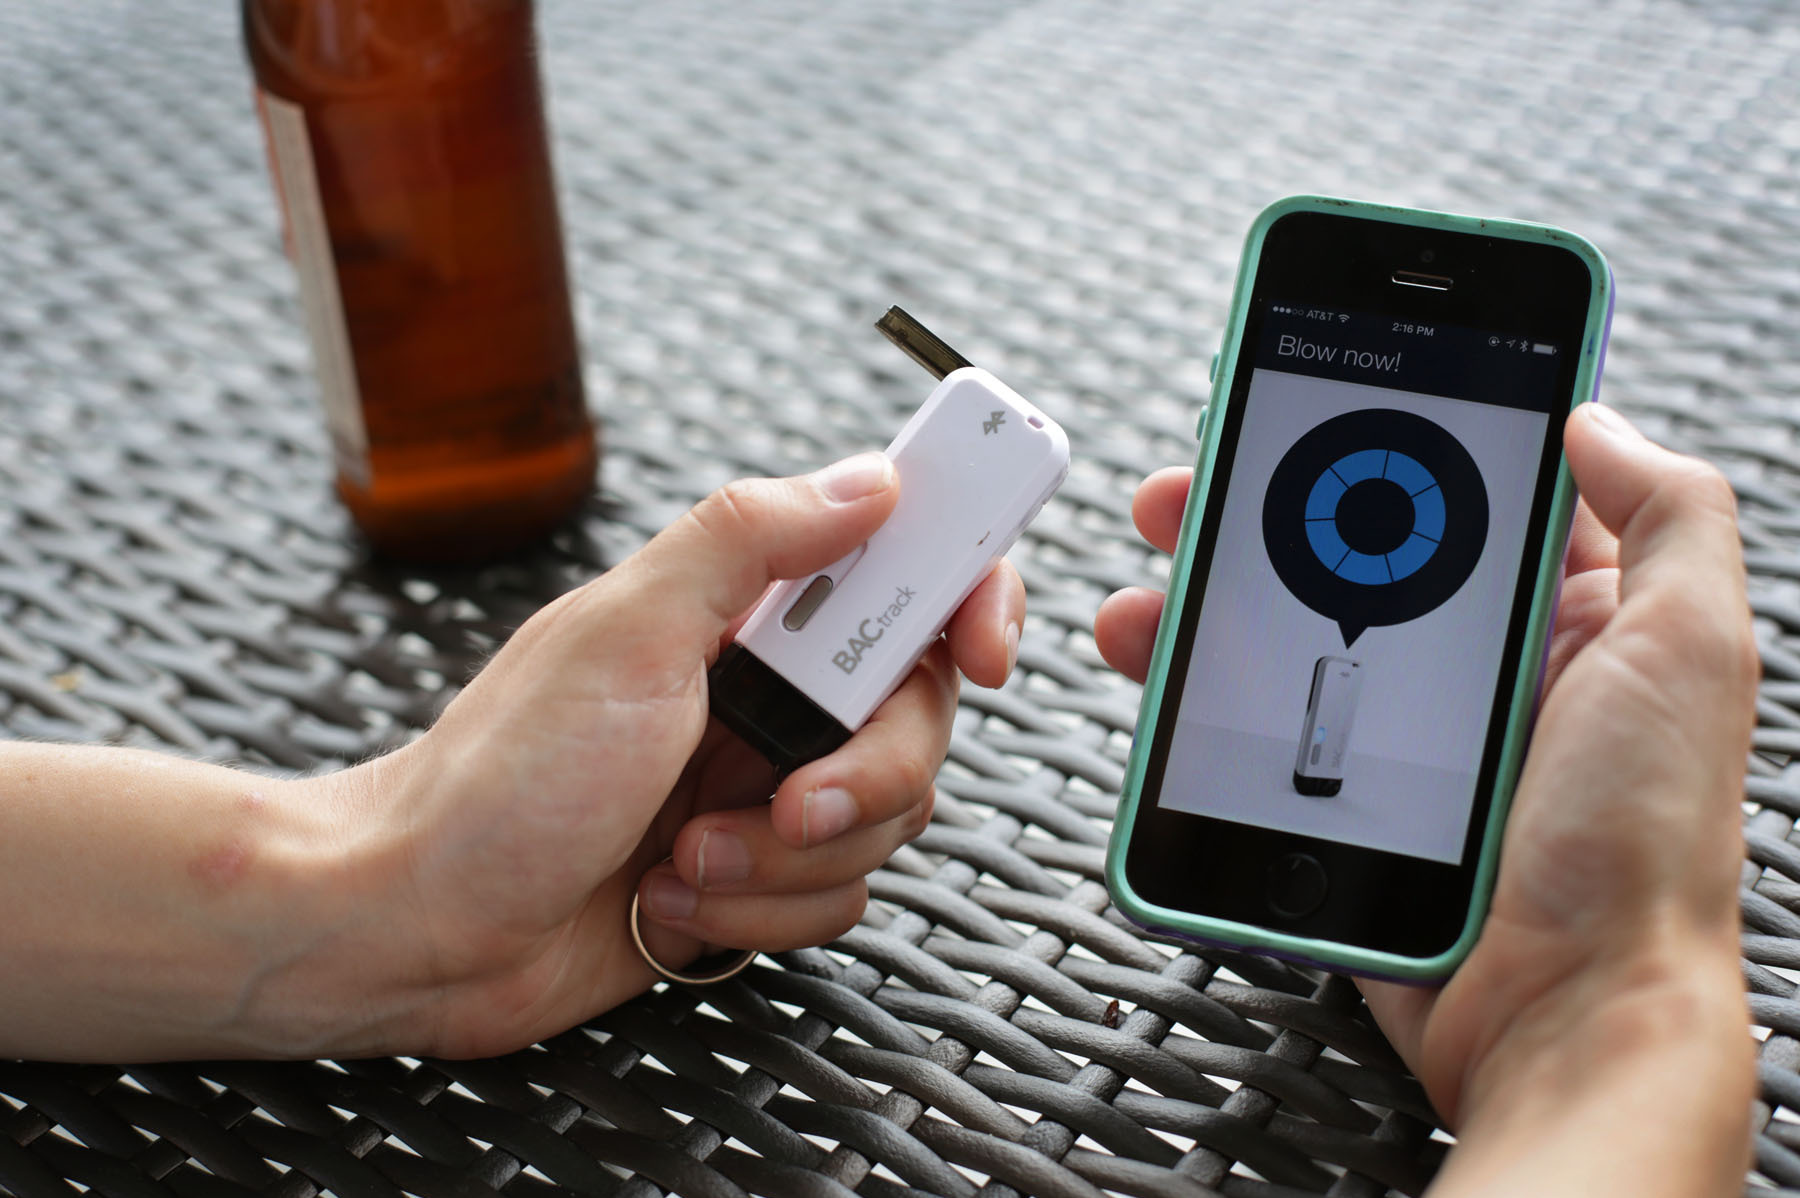 The BACTrack Vio keychain breathalyzer and app on the iPhone at NPR headquarters in Washington, D.C. A public health researcher says tools like this could help people make better decisions about alcohol use. Photo: Meredith Rizzo/NPR